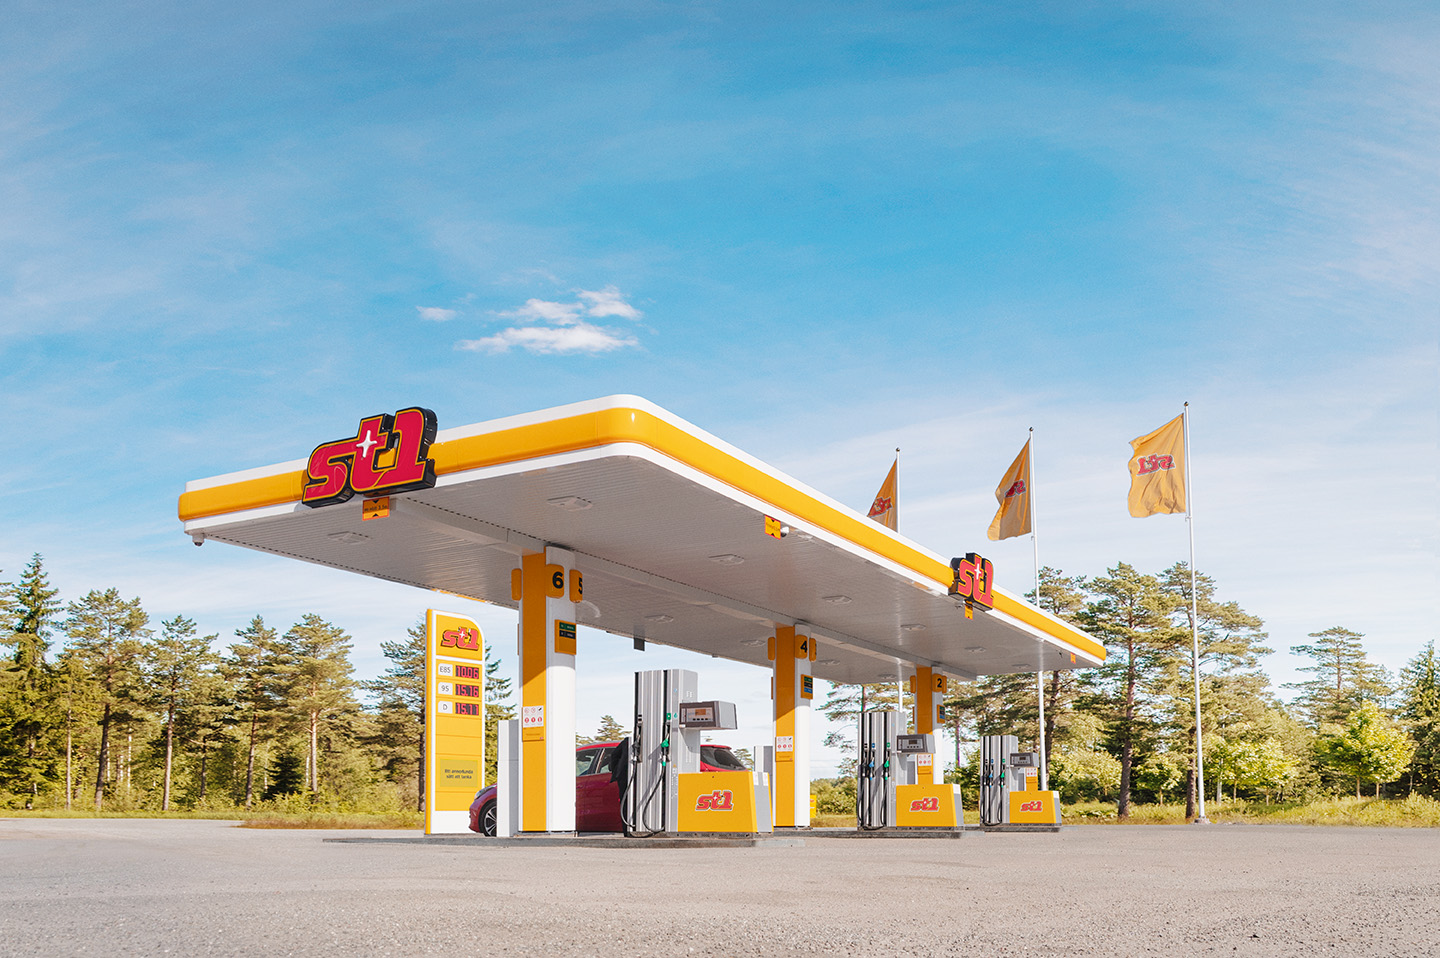 Image of st1 gas station